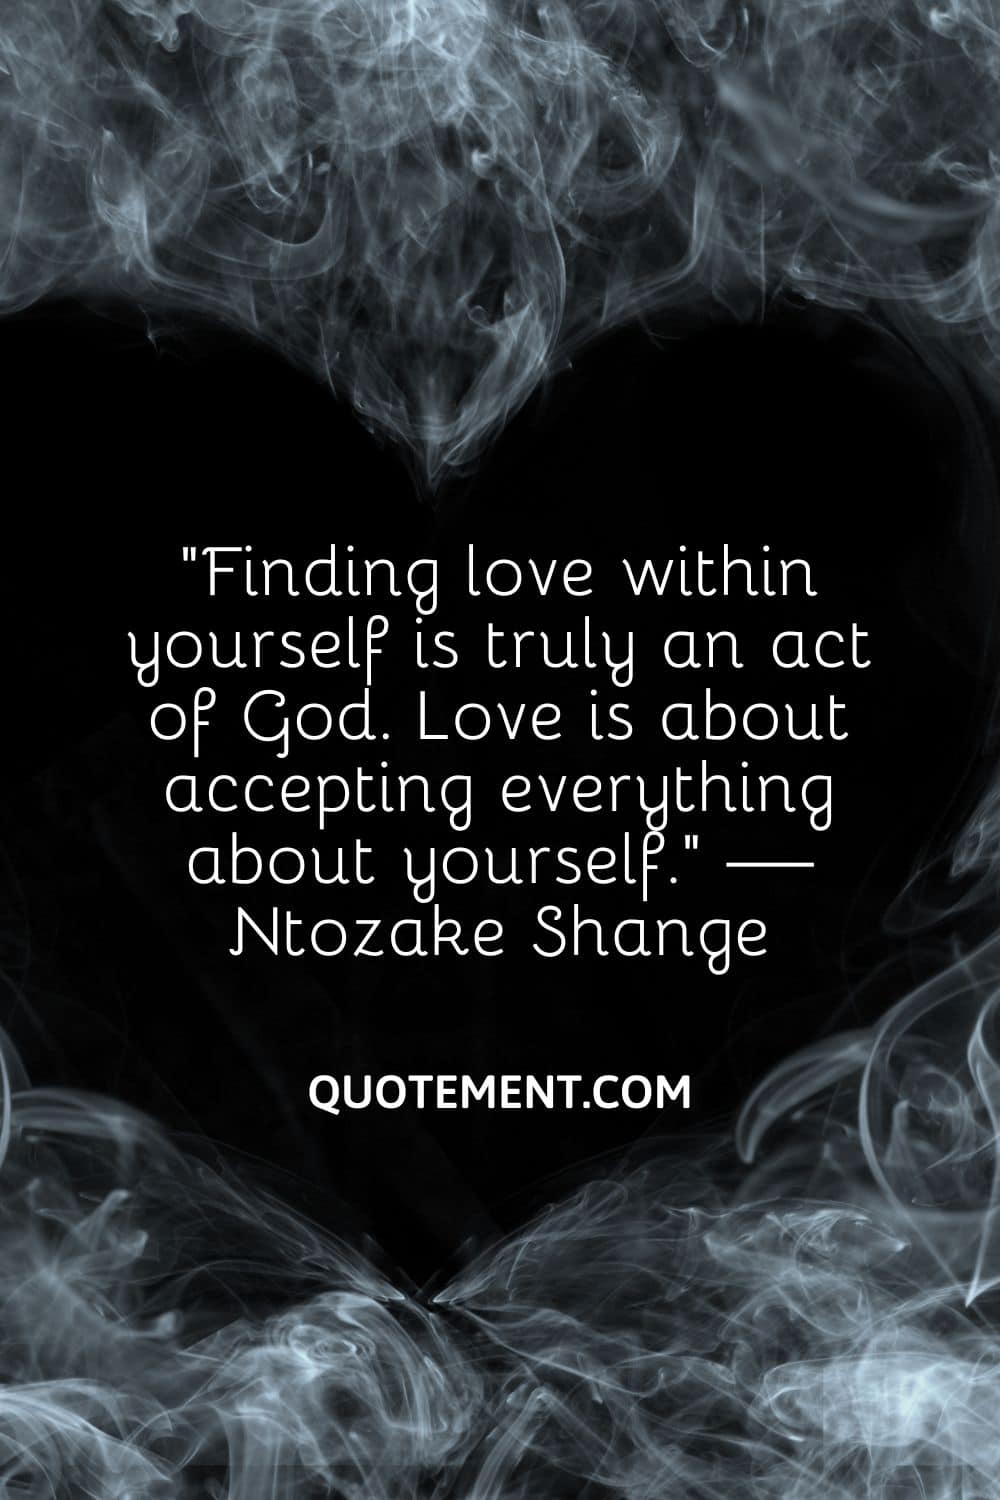 Finding love within yourself is truly an act of God